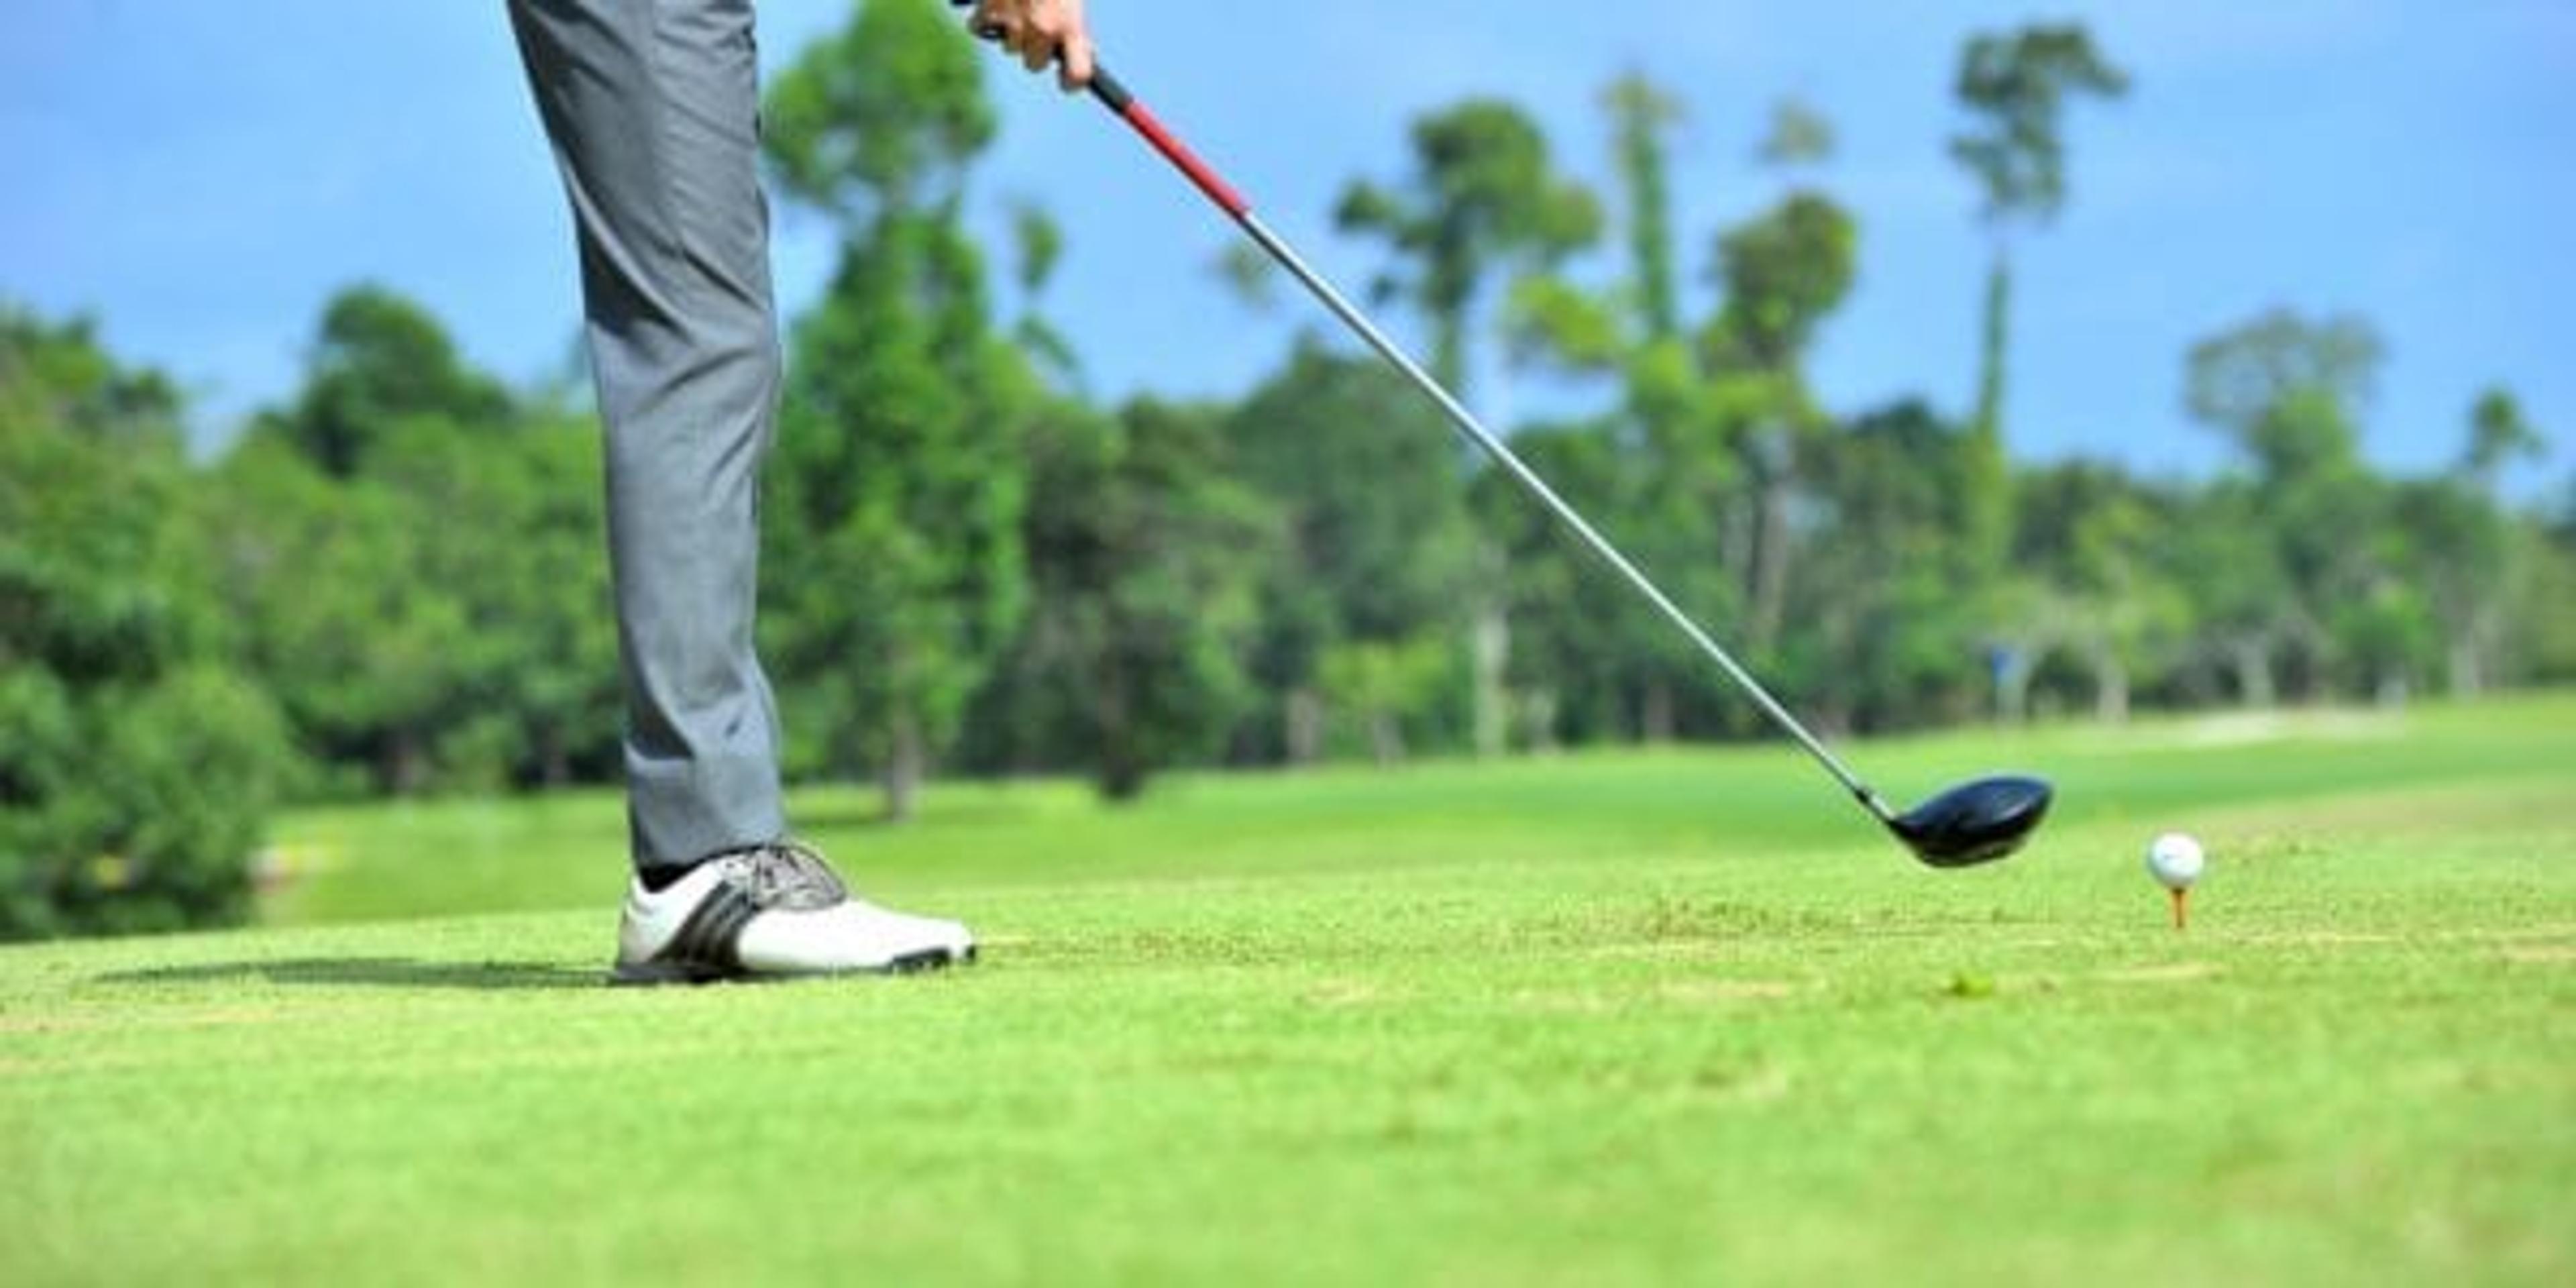 Why golf is such great exercise